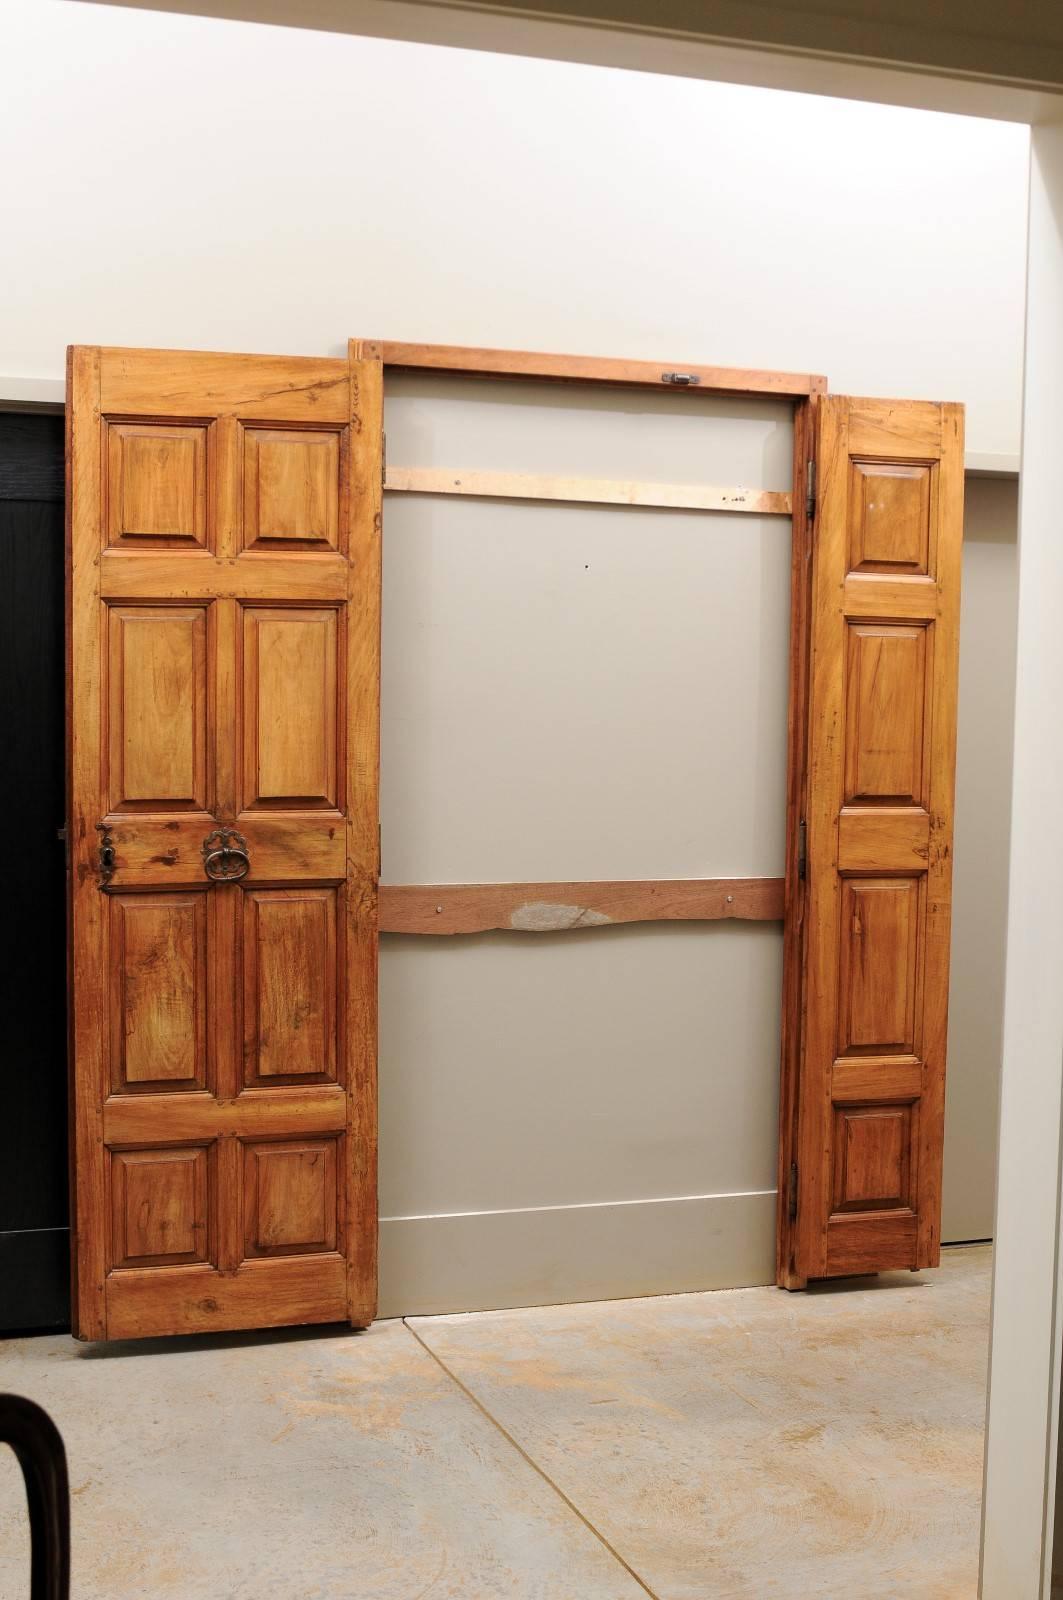 18th Century French Wooden Door with Simple Raised Panels and Original Hardware 1